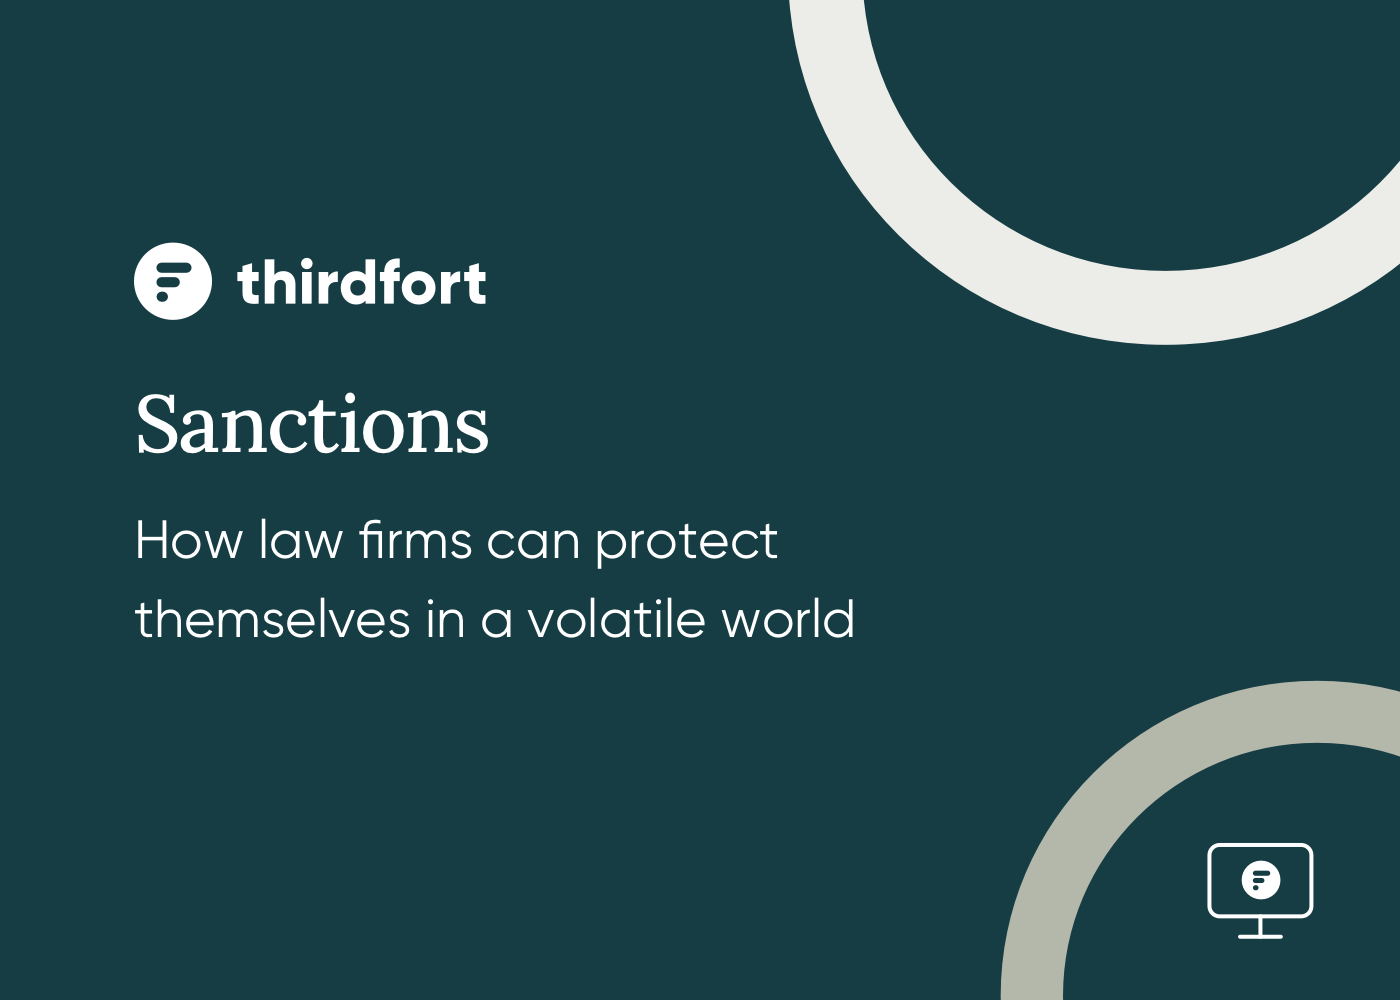 A Thirdfort webinar with title "Sanctions"